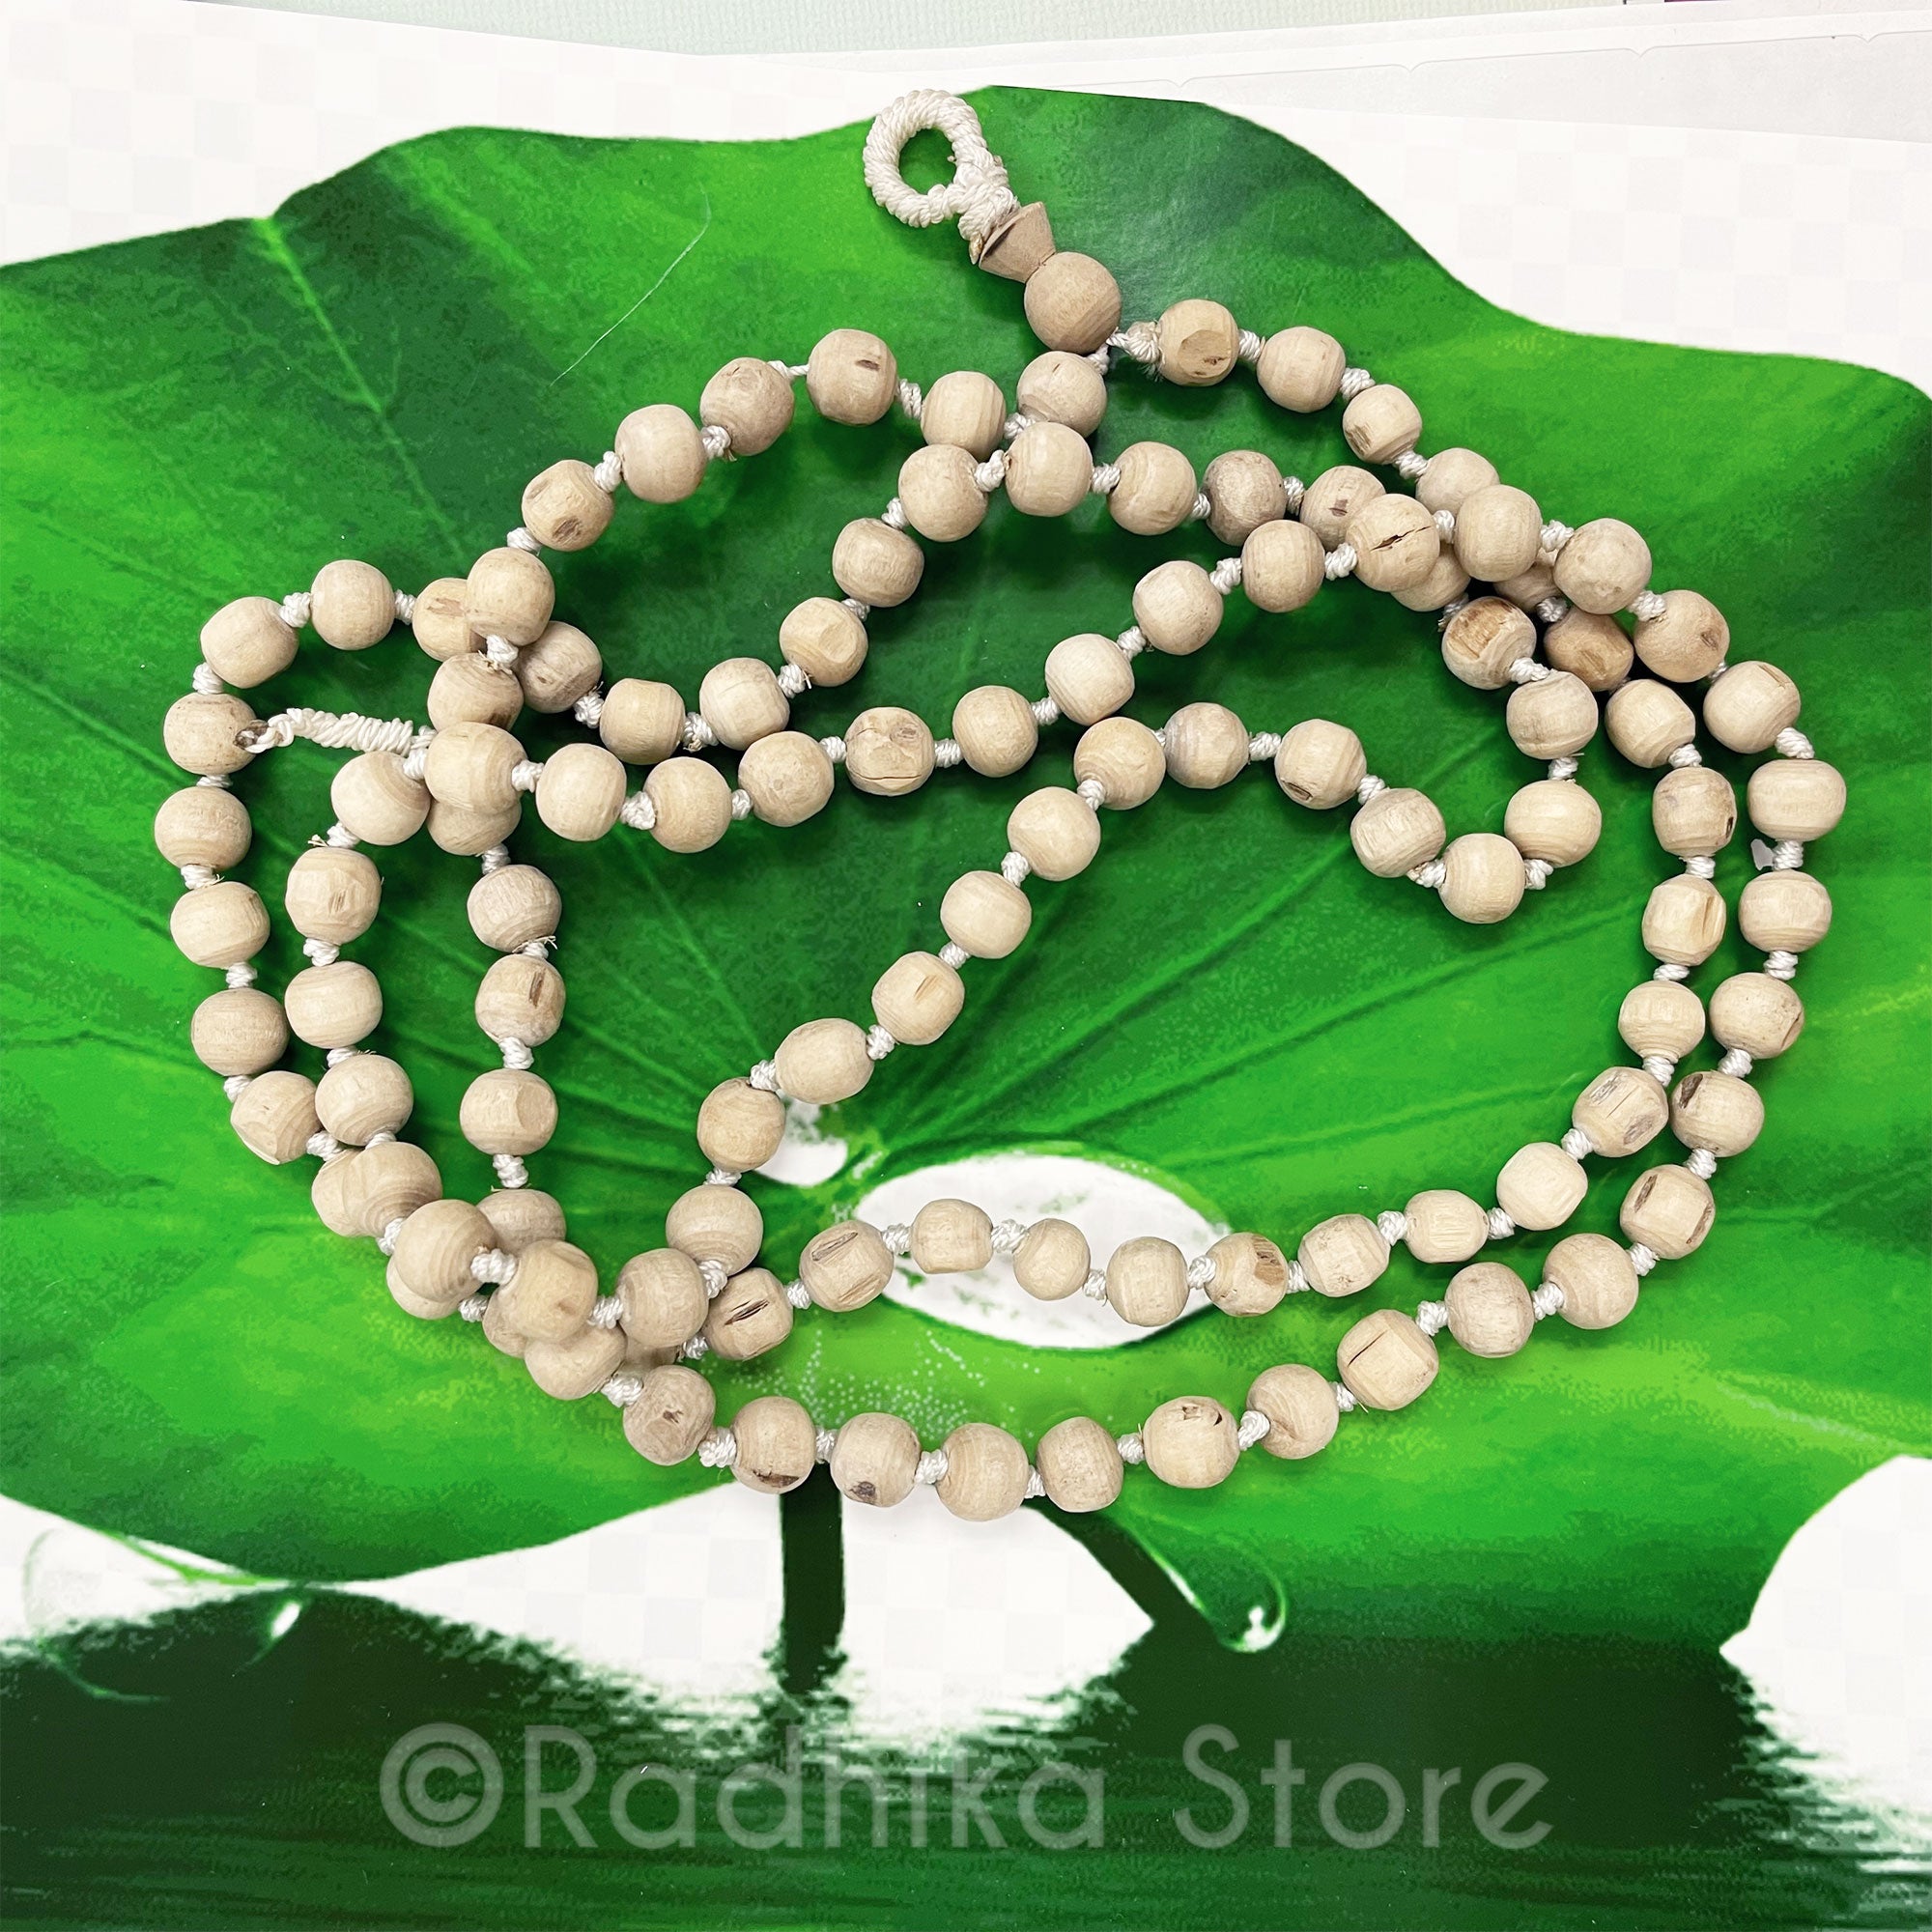 Pure Tulsi Japa Beads - Hang 27" to 29" Inches Long